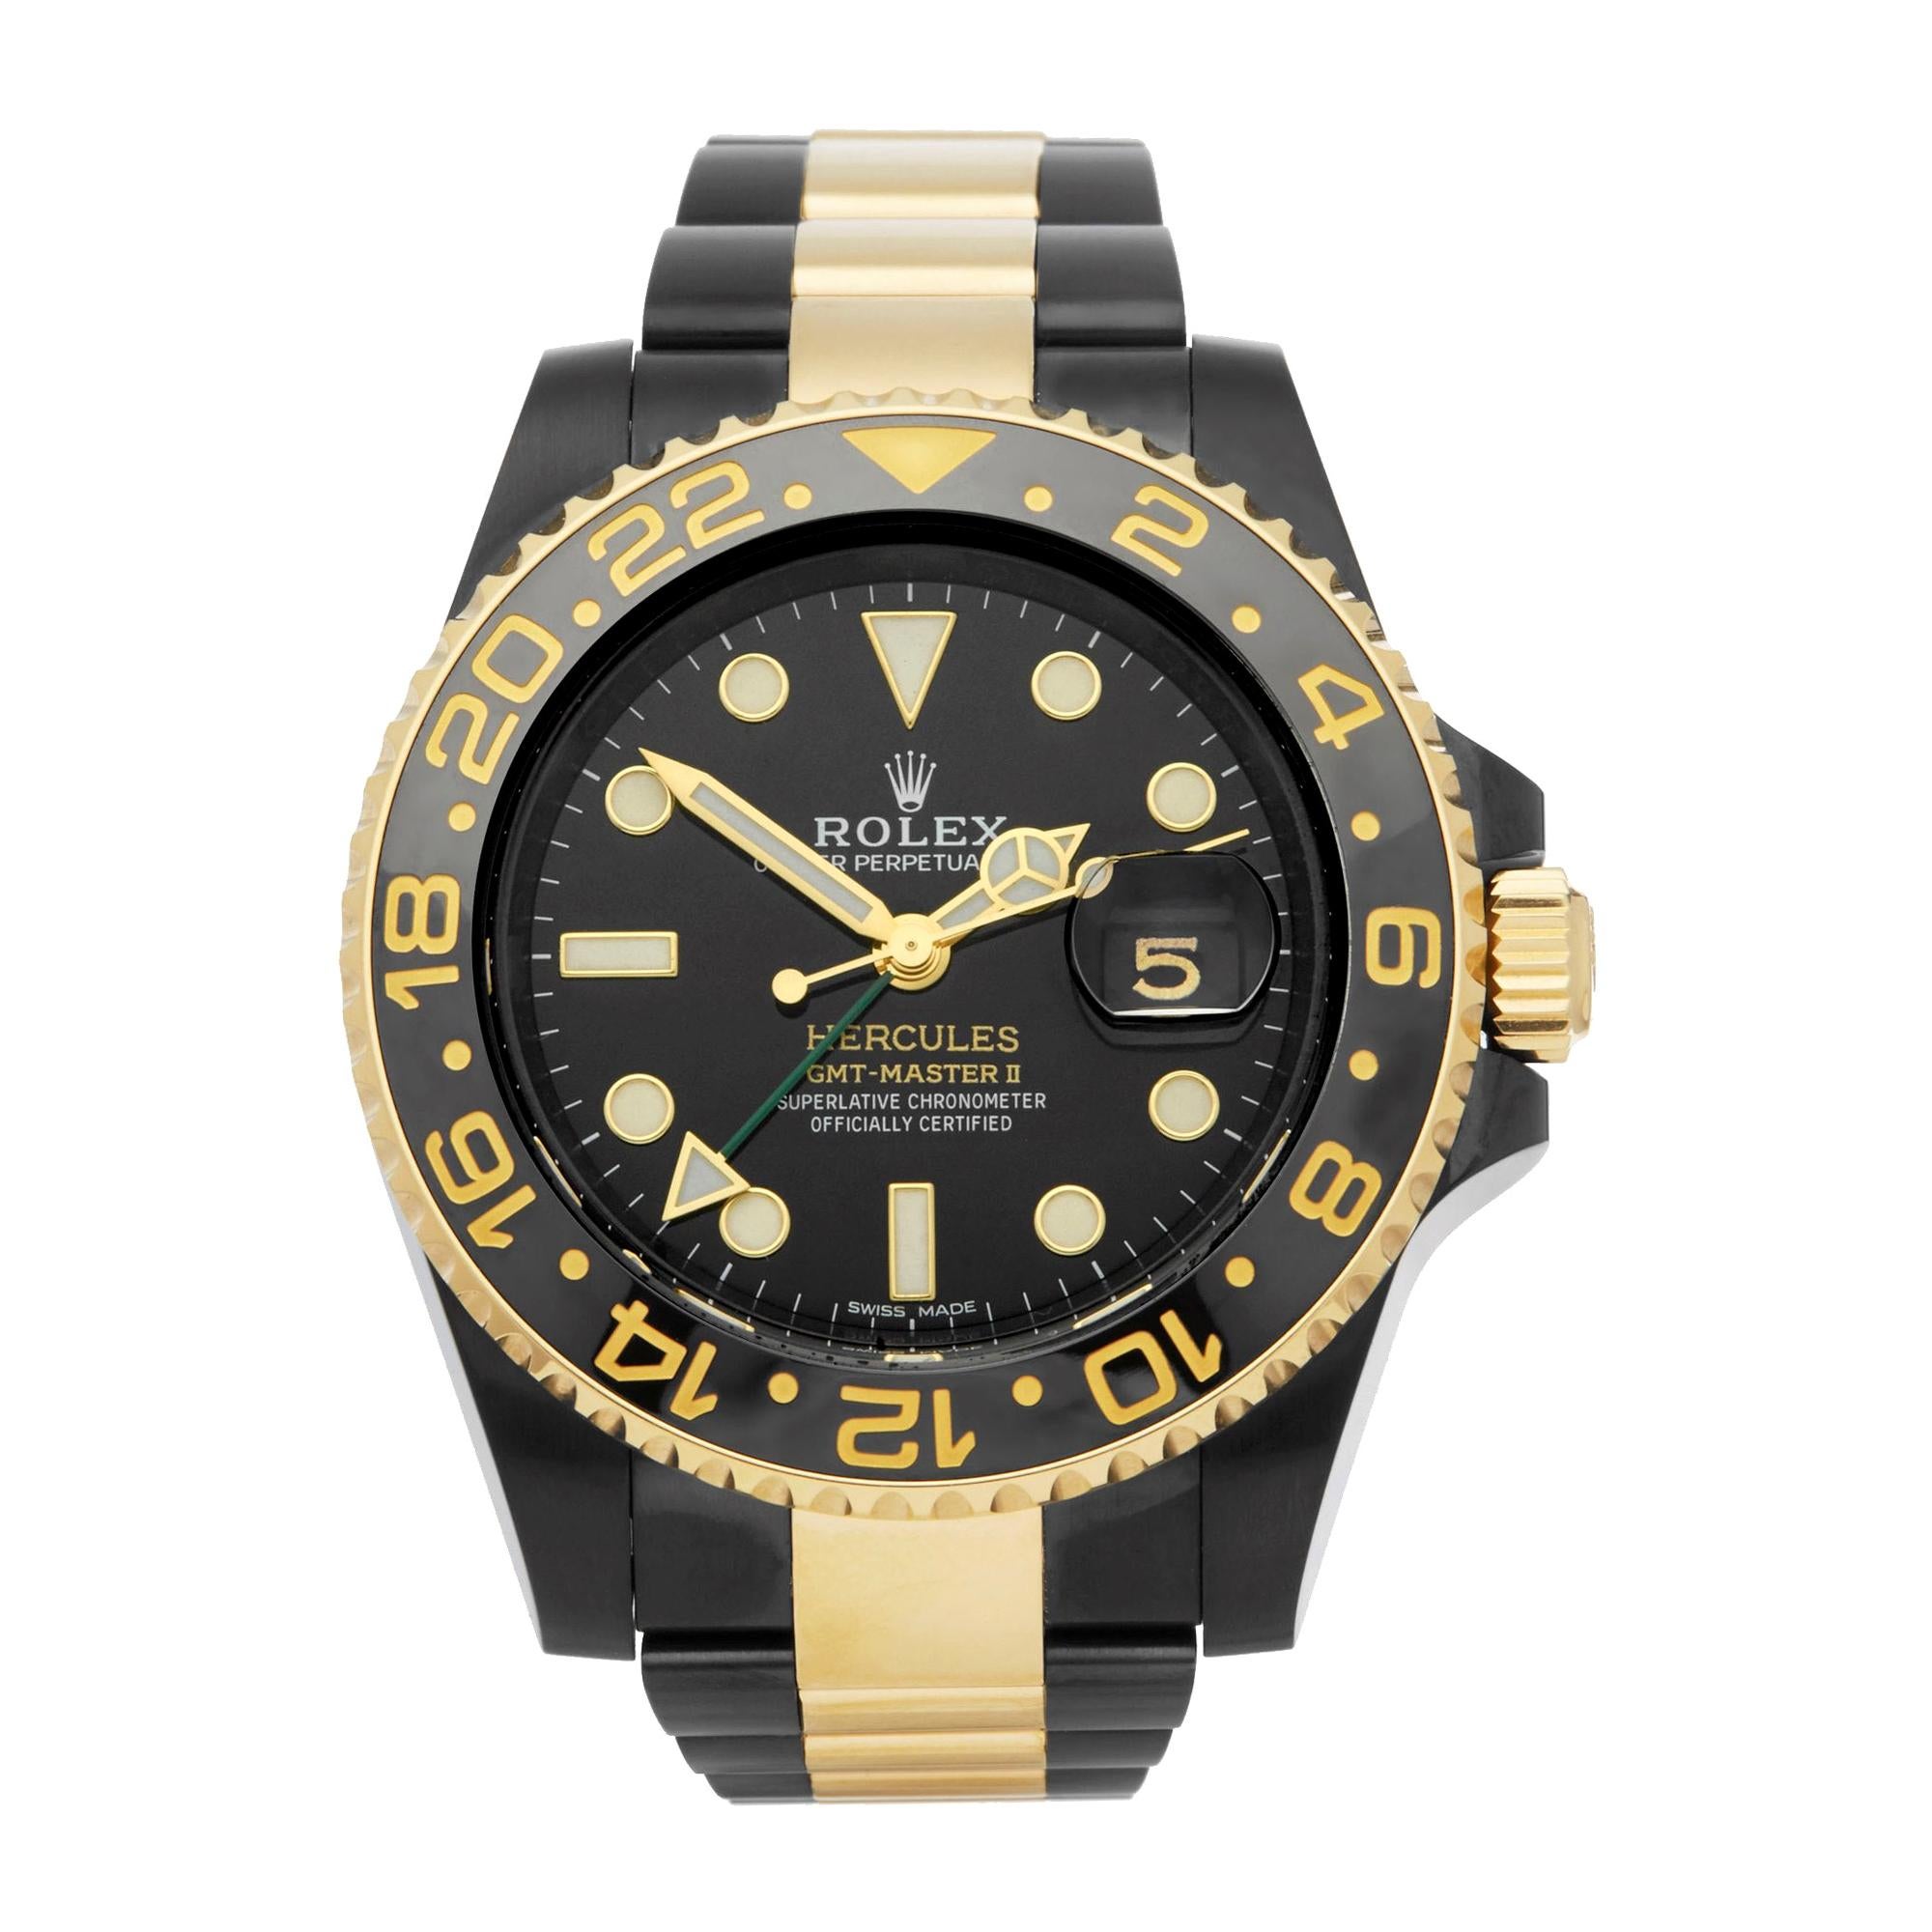 Rolex GMT-Master II Hercules Dlc Coated Stainless Steel and 18 Karat Gold 116713